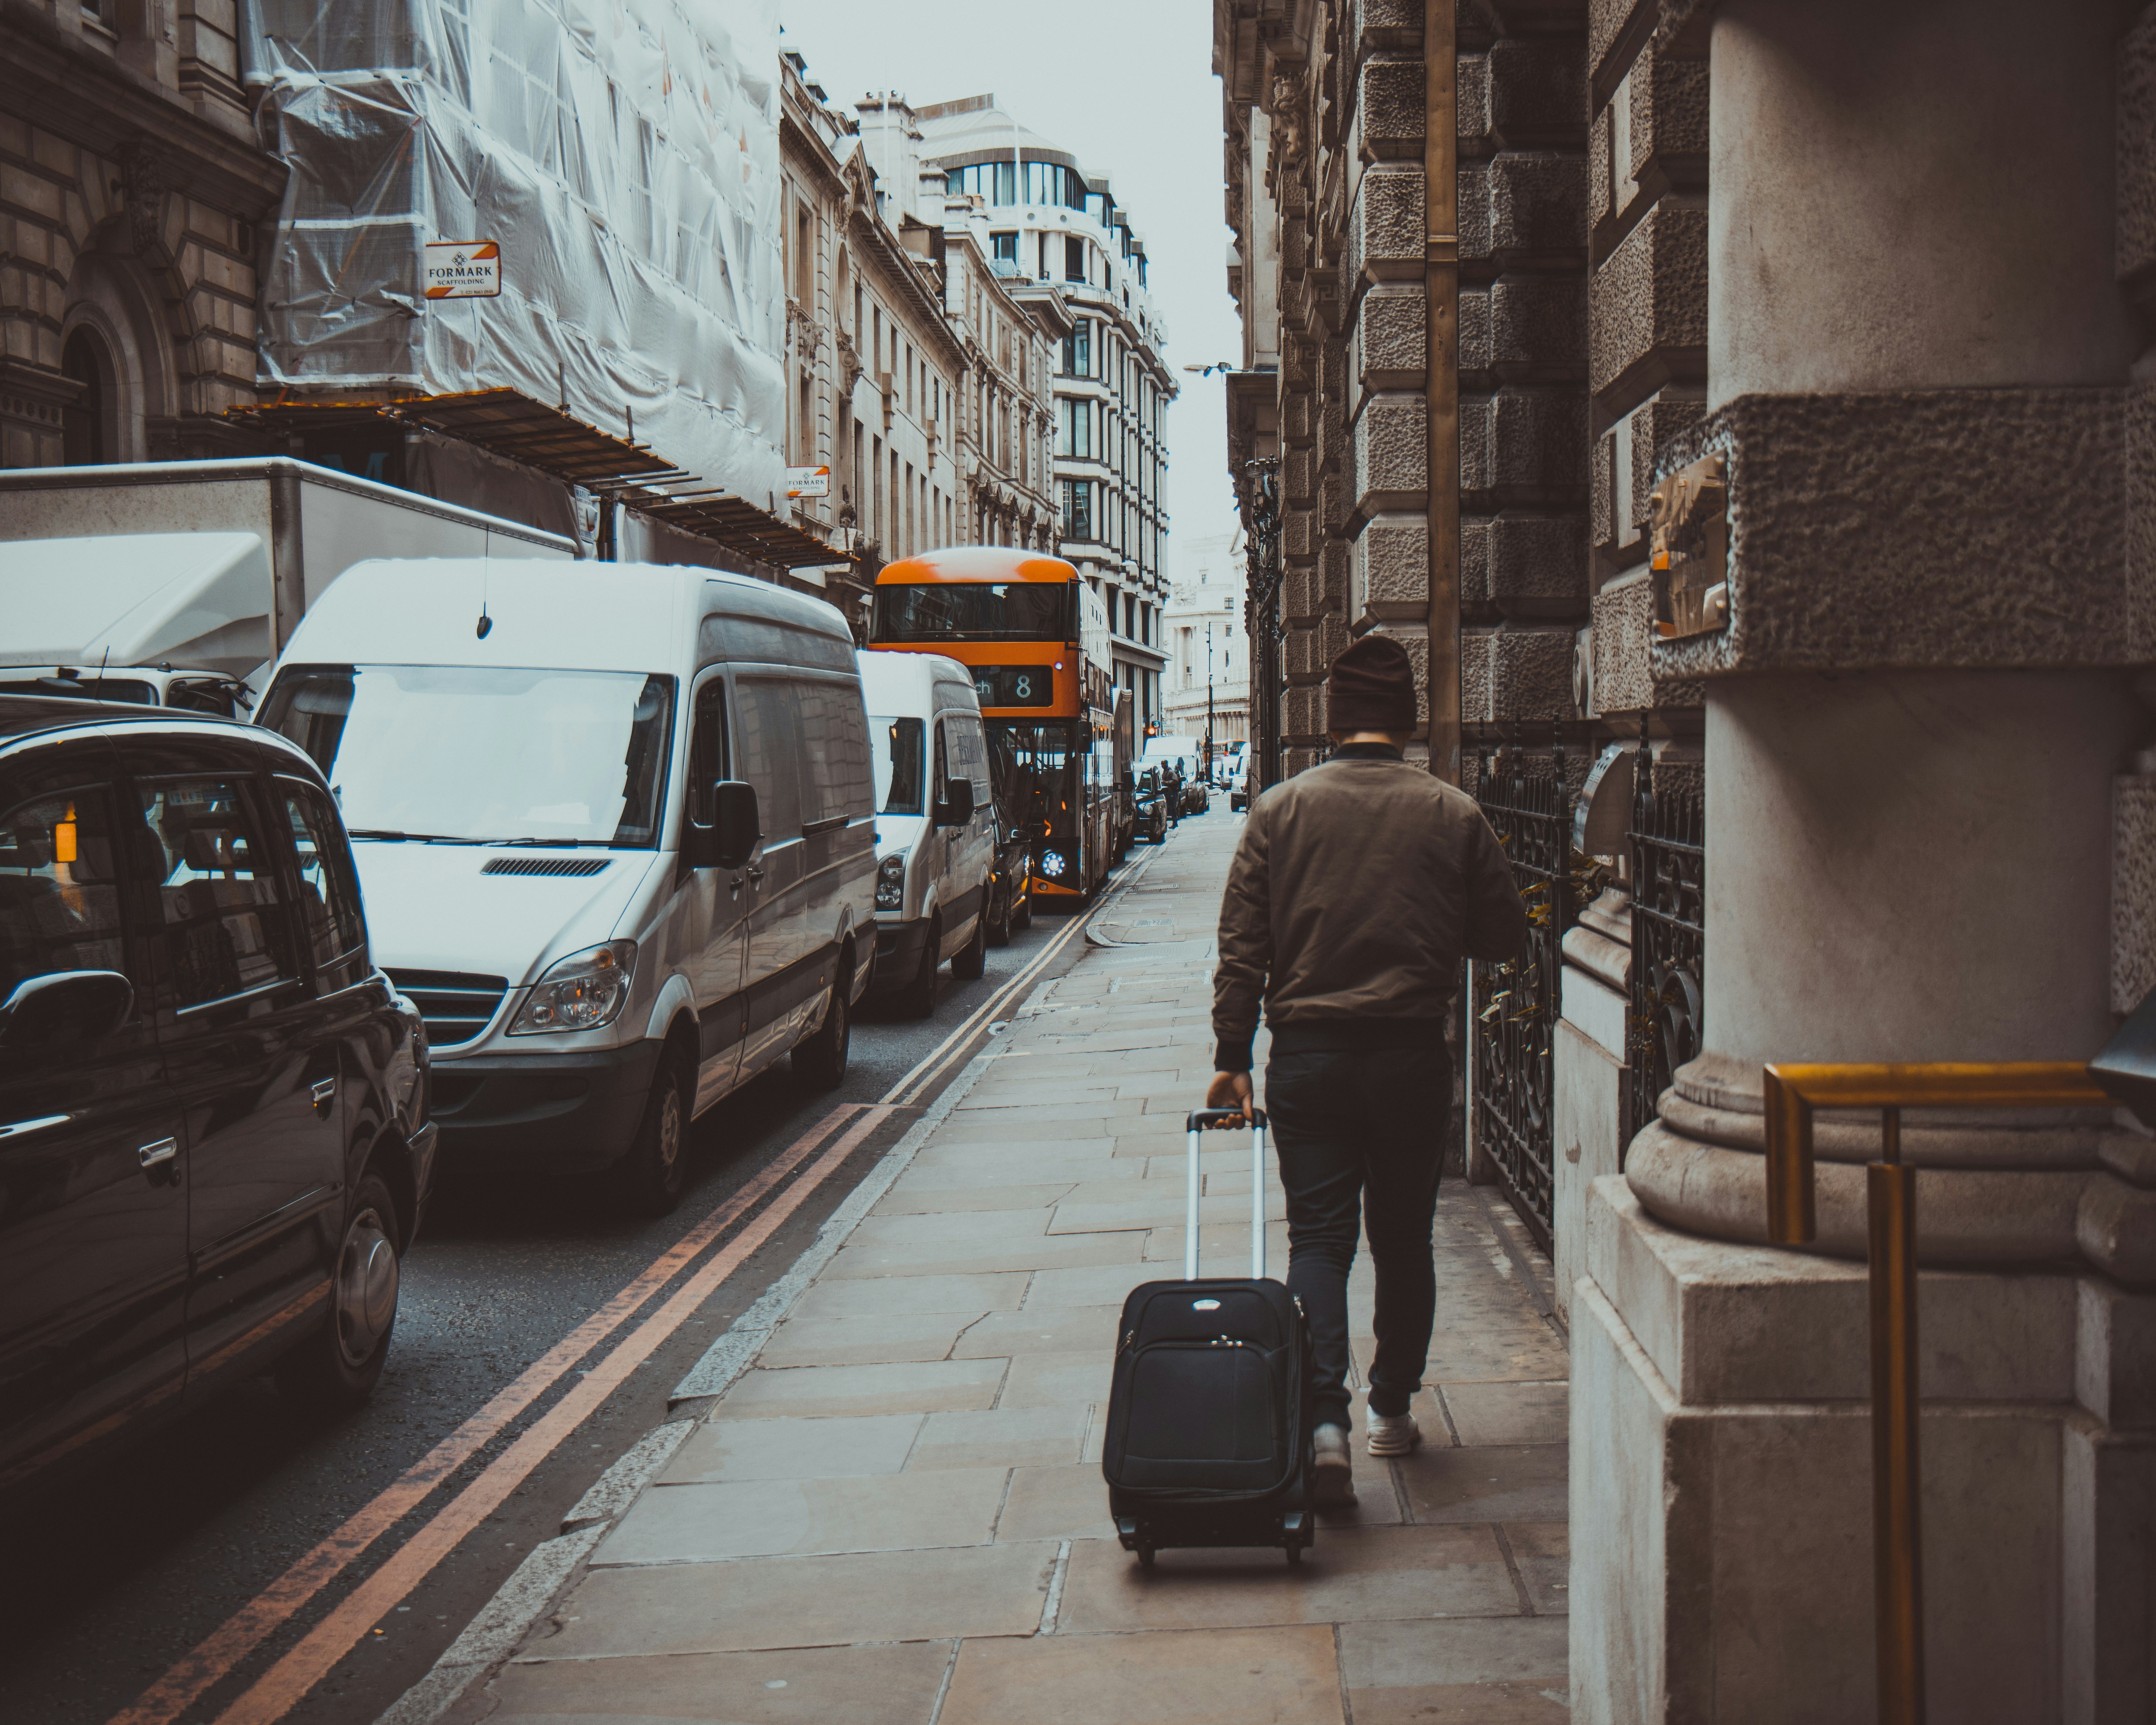 A man walking with a suitcase | Source: Unsplash